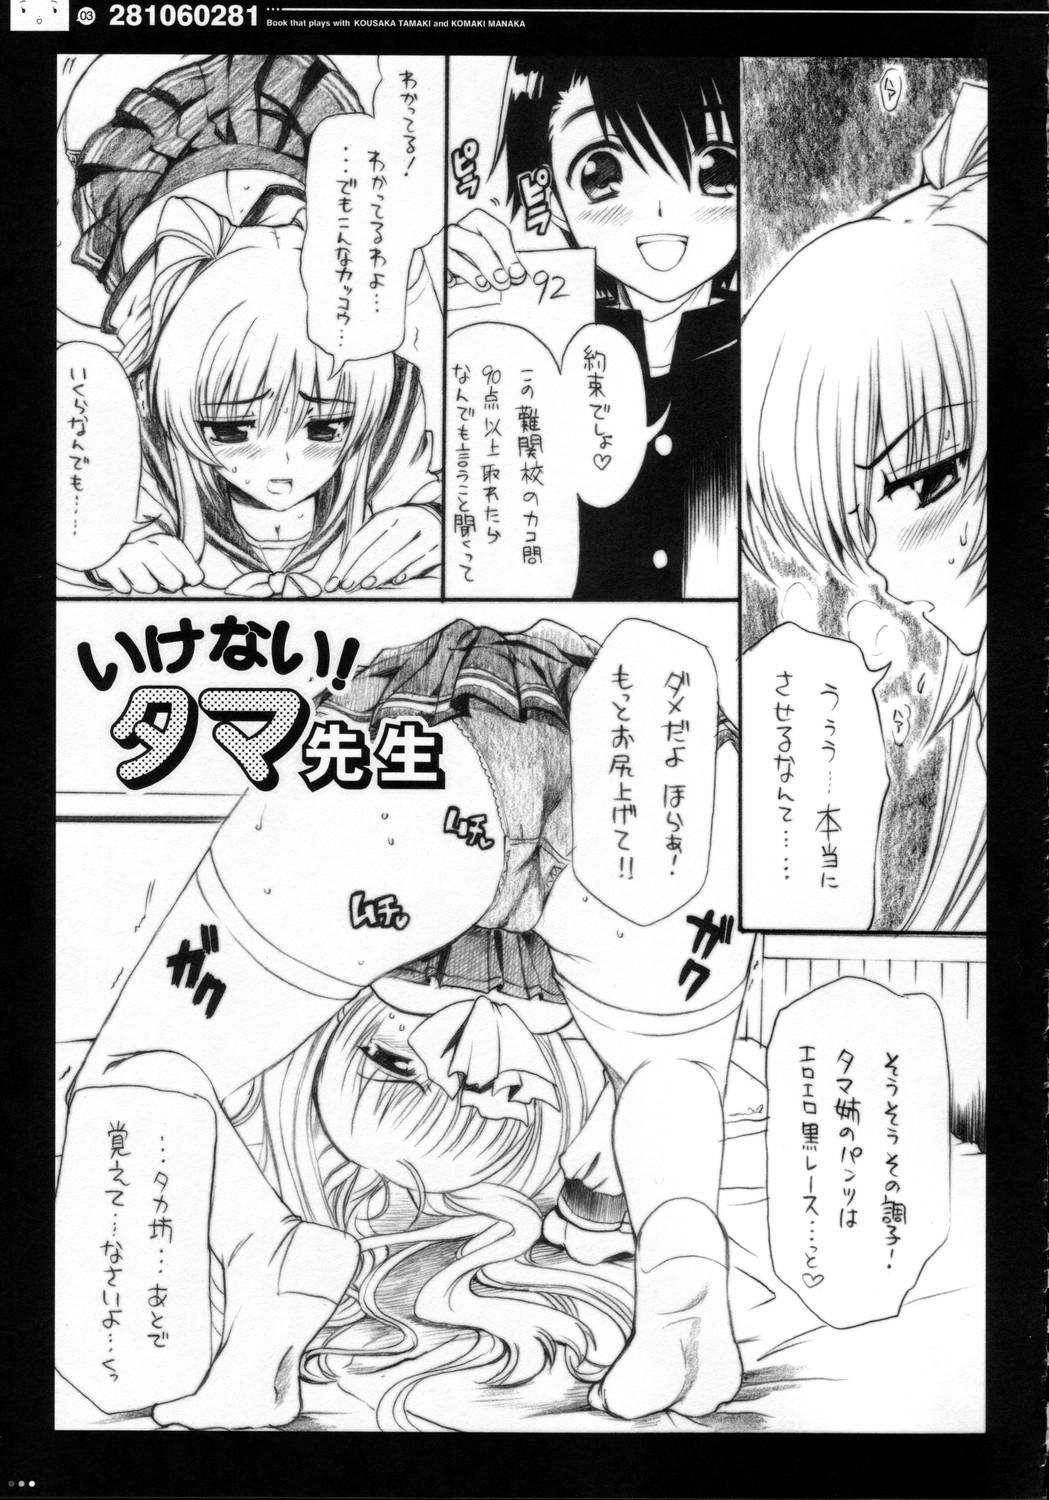 Banging (C69) [QP:flapper (Pimeco, Tometa)] QPchick10a Leaf-SIDE -Re:Re:CHERRY- (ToHeart 2) - Toheart2 Cavalgando - Page 6